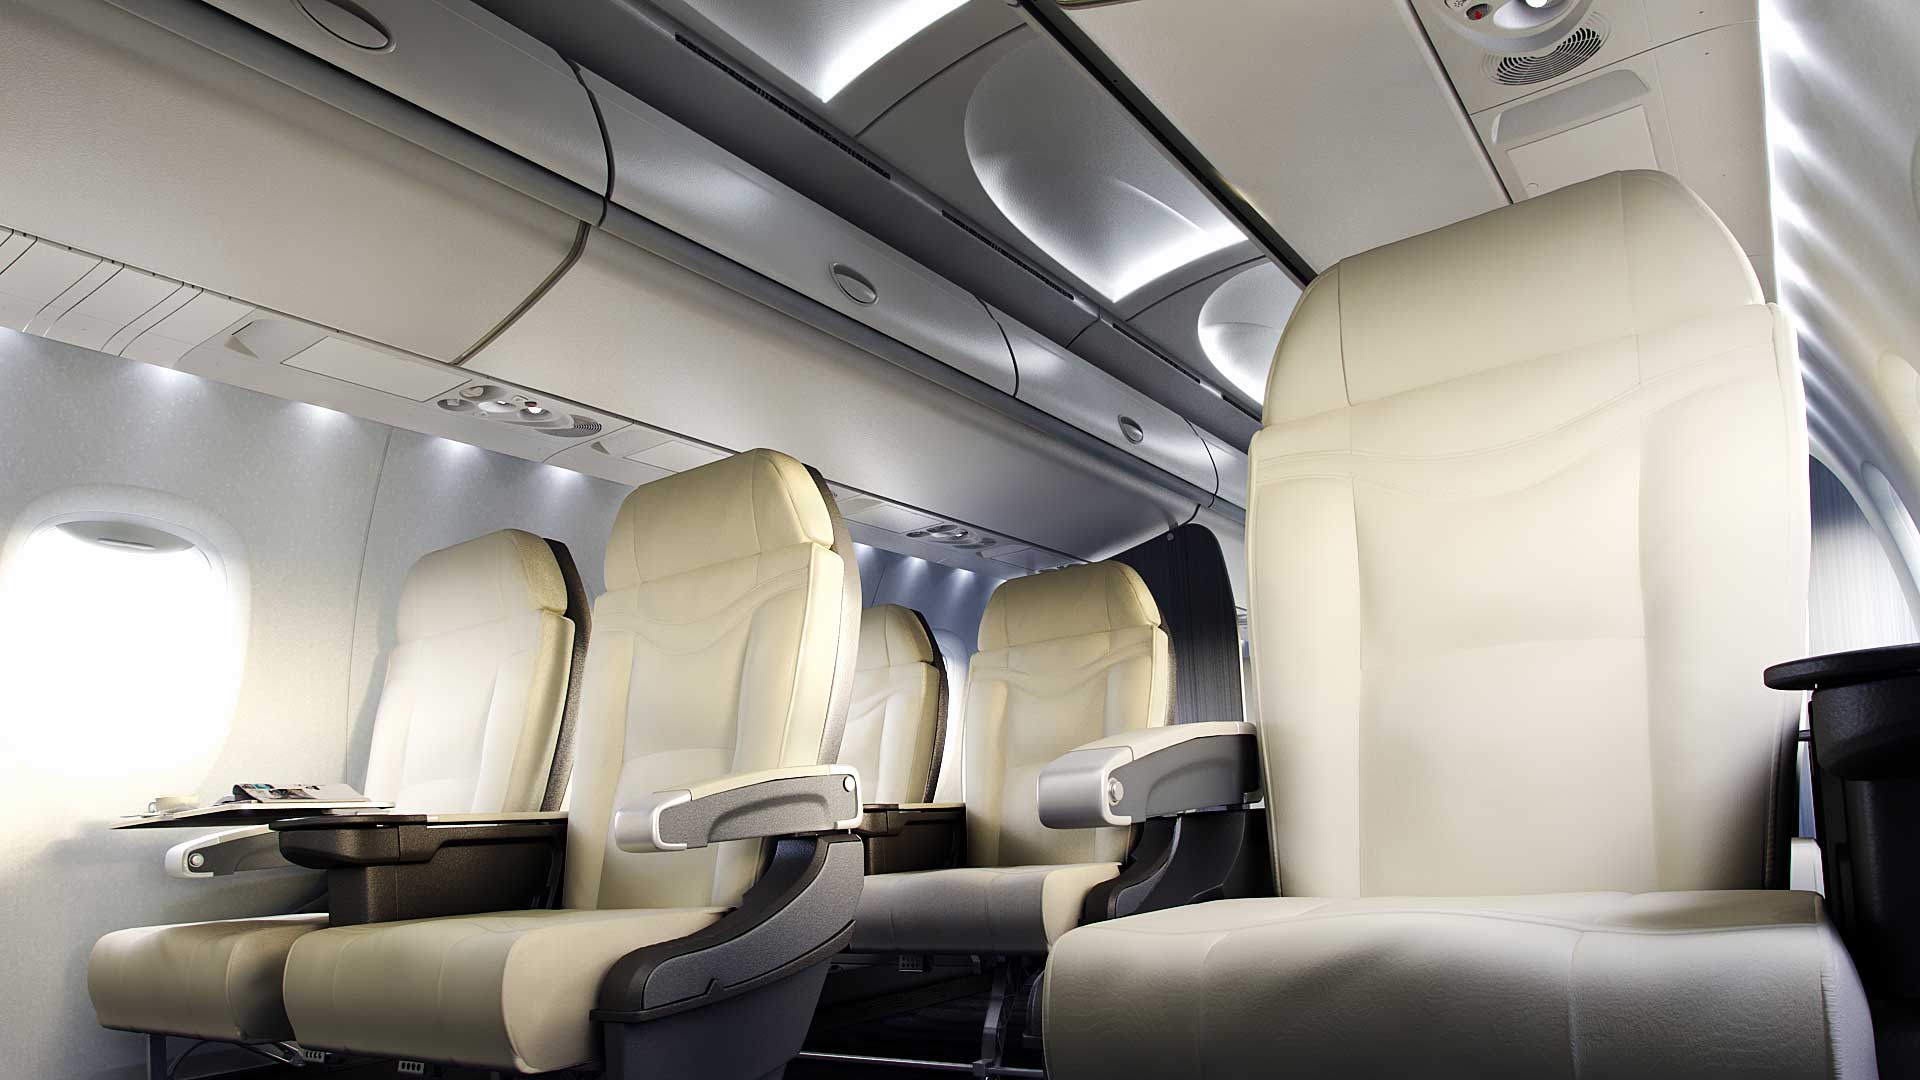 Class-leading height and width contribute to the bright and airy surroundings. Slim-seat design increases legroom without compromising comfort while the widest economy-class seats and larger overhead bins complete the package for a big-jet feel.